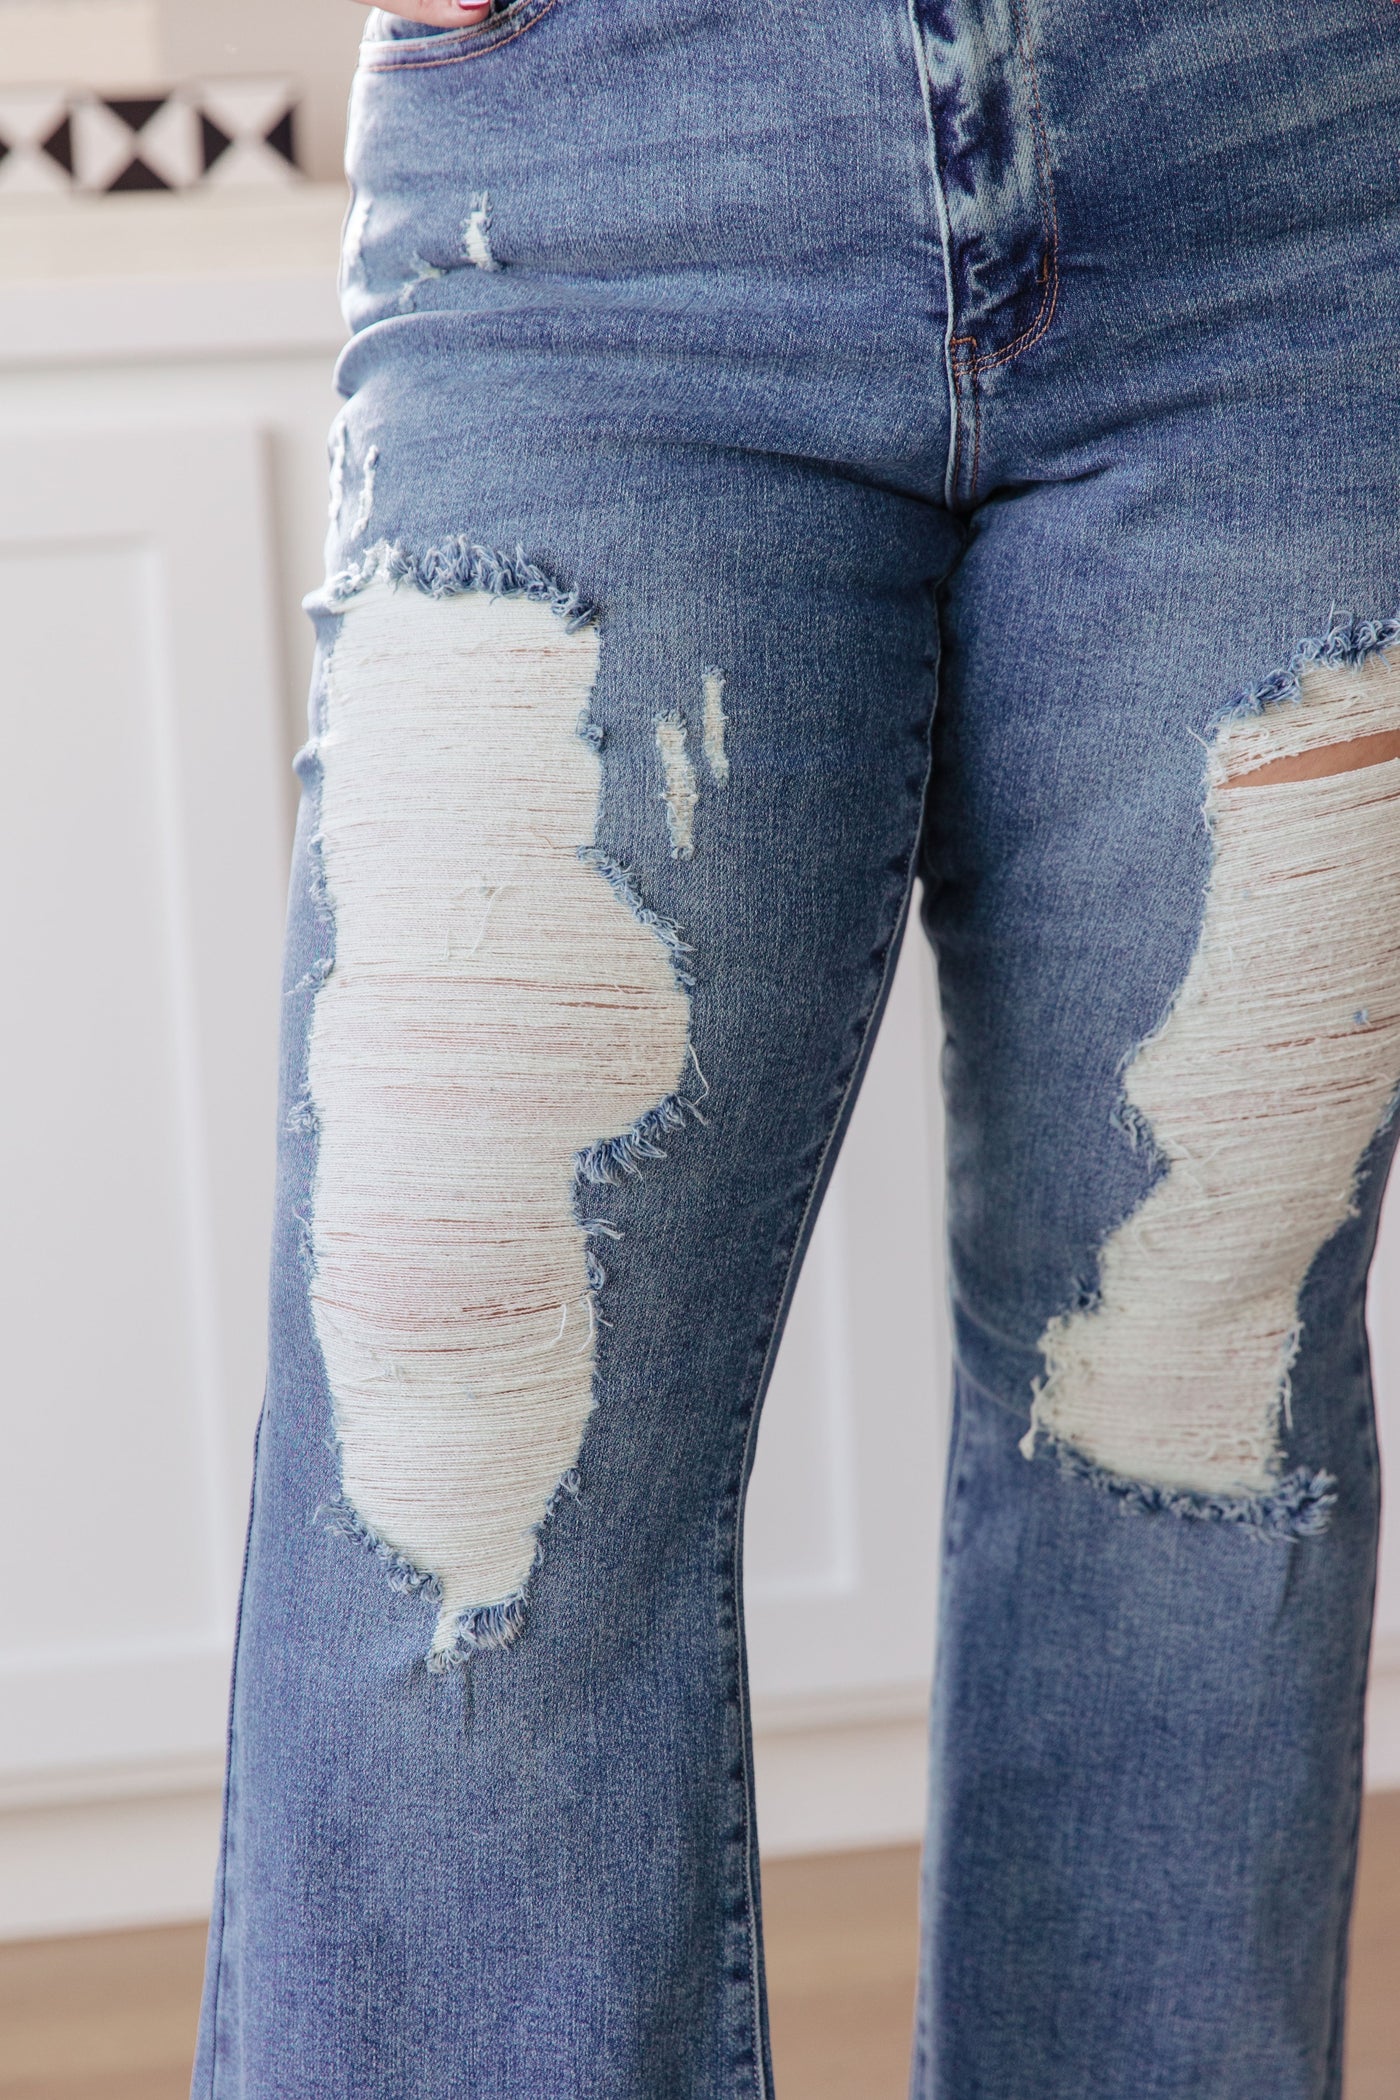 If you've got a flair for the dramatic, look no further than the Kiana Heavy Destroy Flare Jeans from Judy Blue